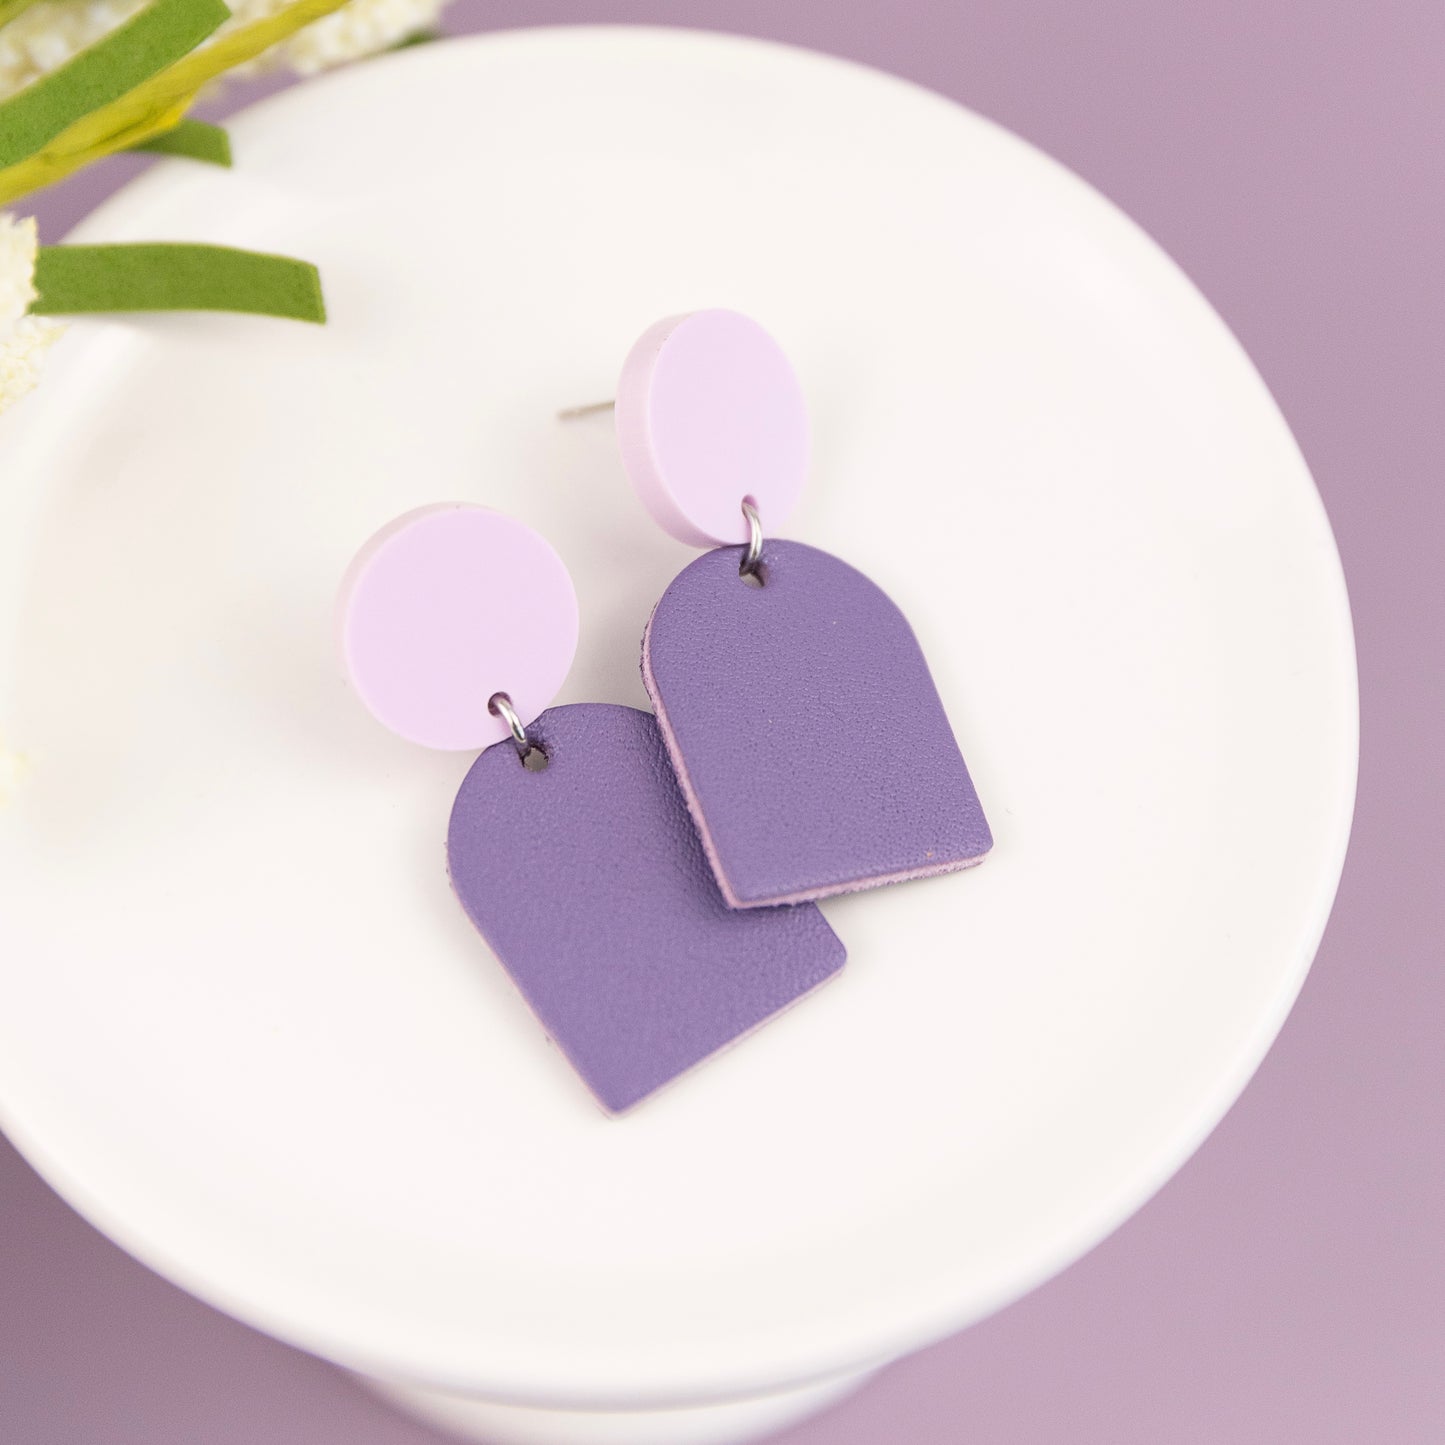 THE ARCH DANGLE in Lavender + Purple/ Lightweight Leather Statement Earrings